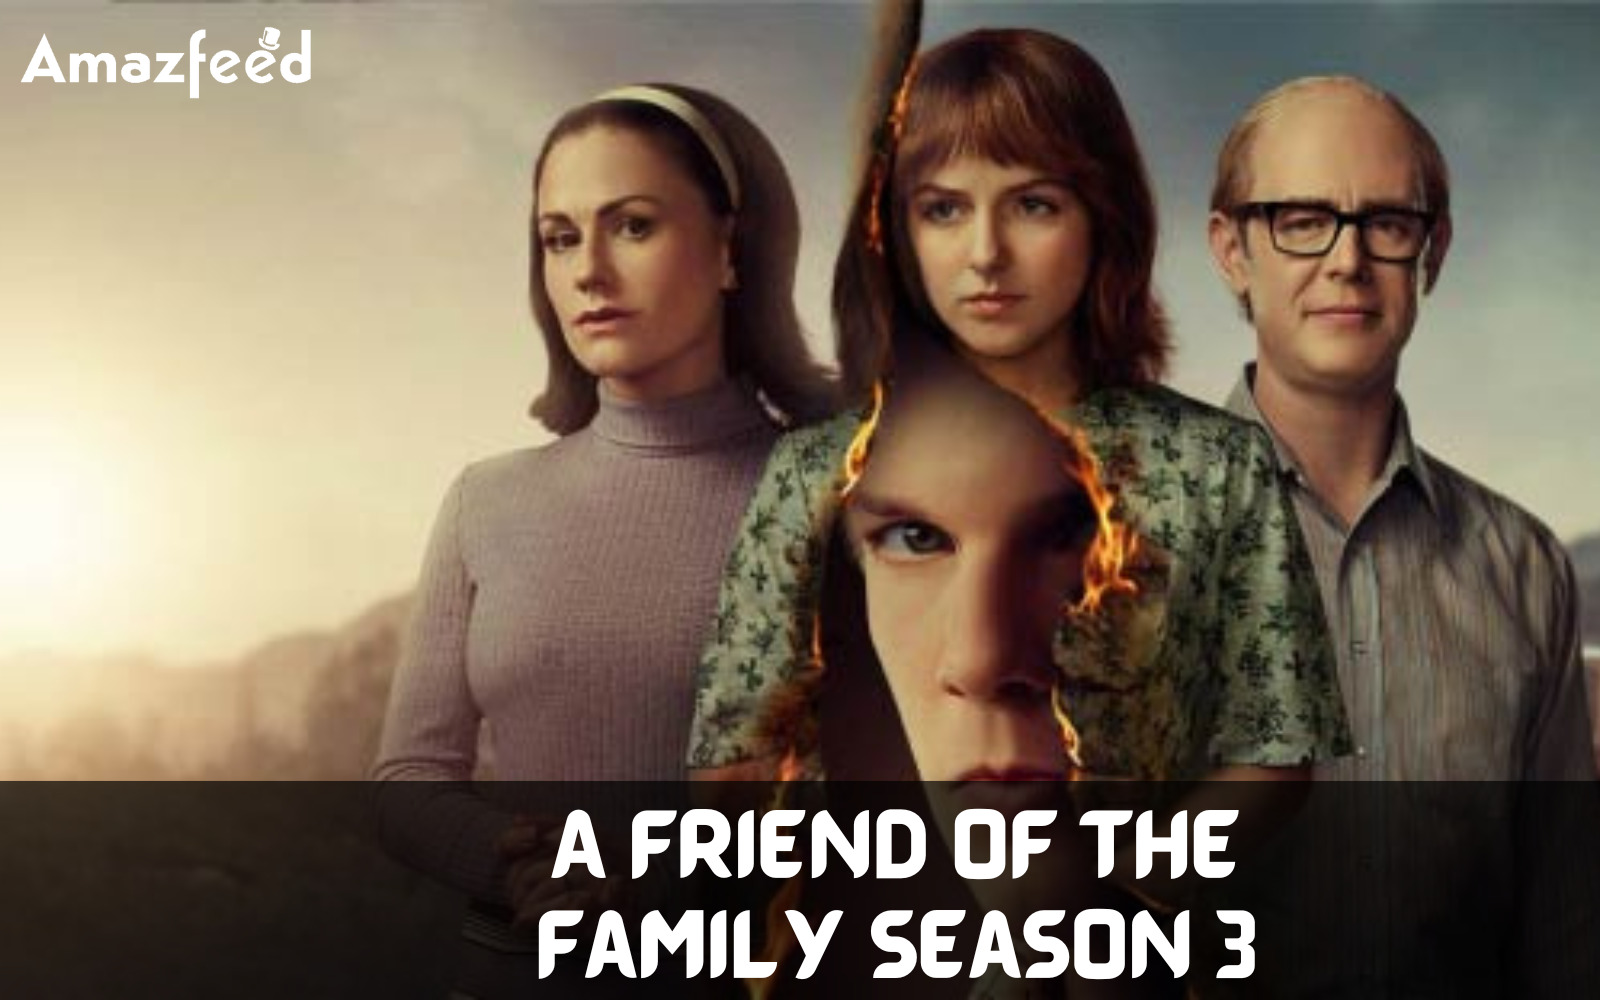 Is A Friend of the Family Season 3 Renewed Or Cancelled